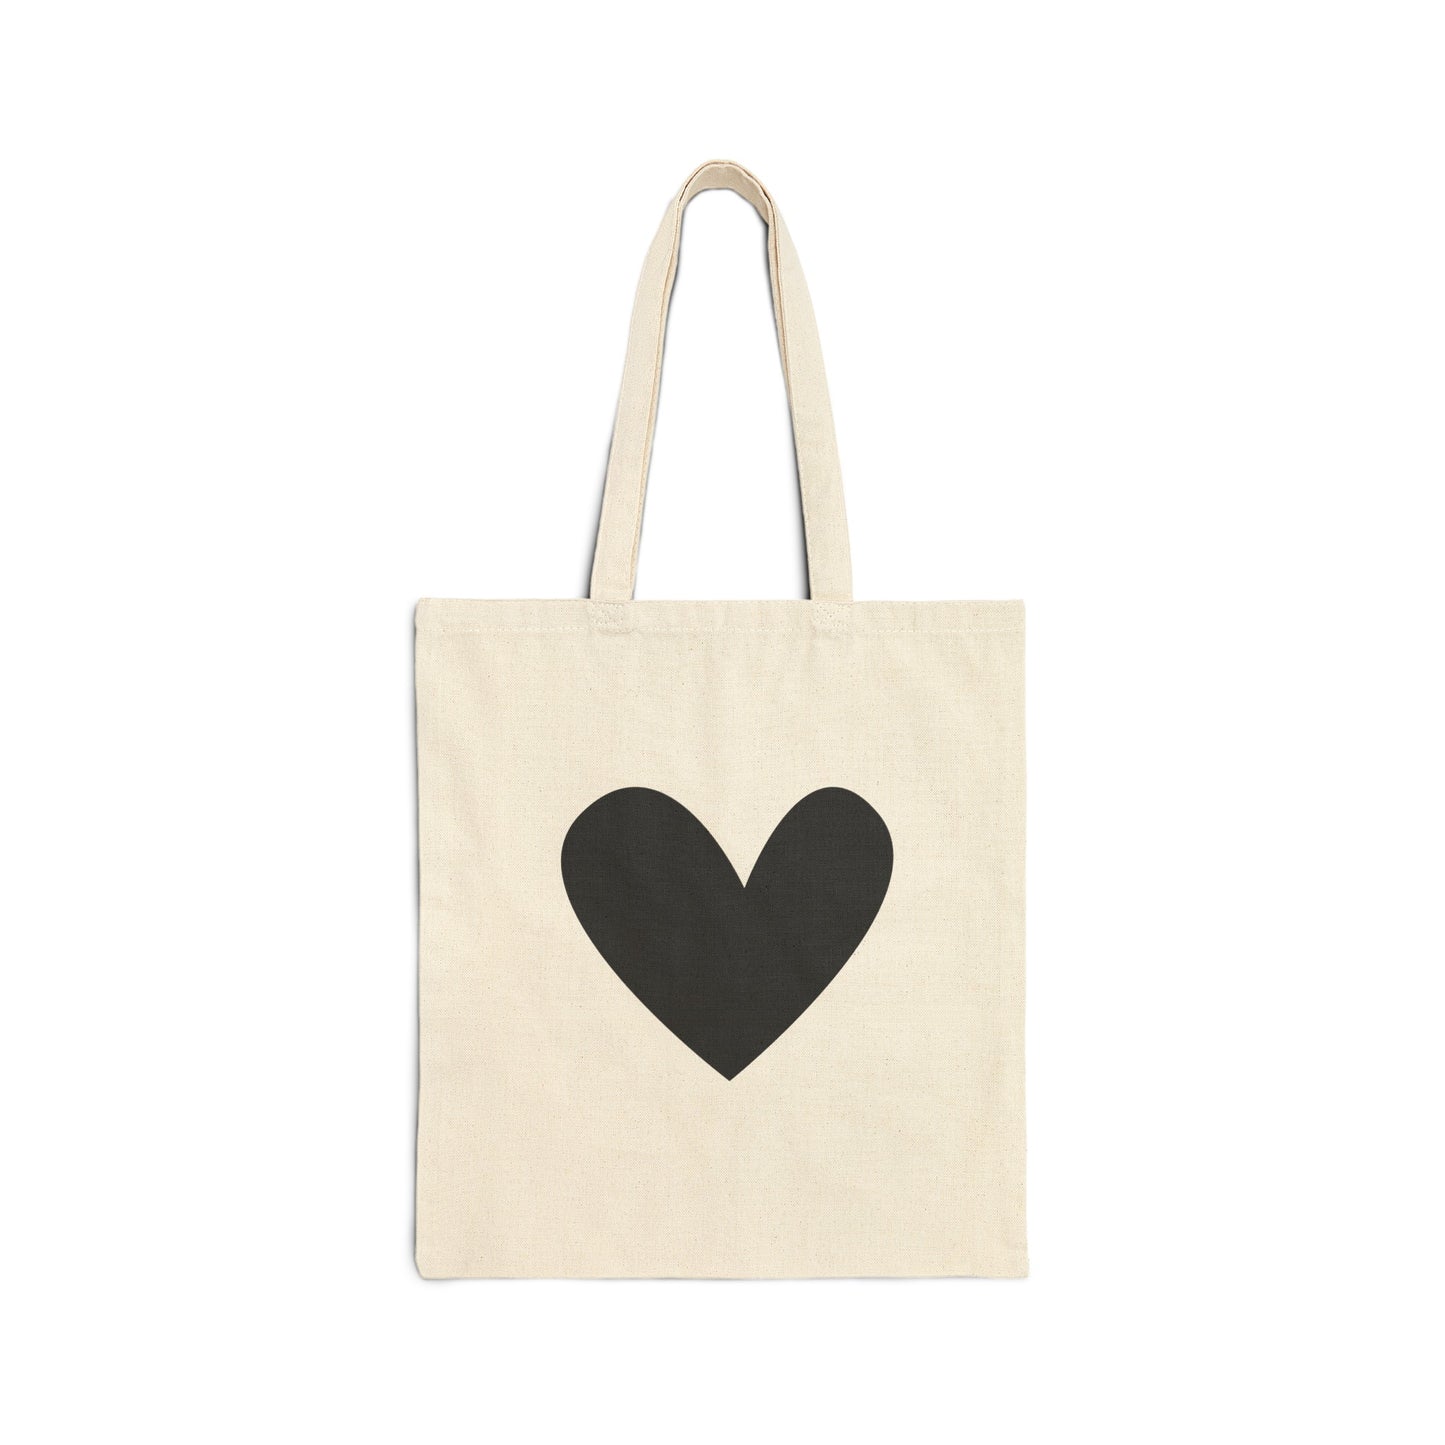 Bold Heart Tote Bag - Durable 100% Cotton Canvas, Perfect for Everyday Use